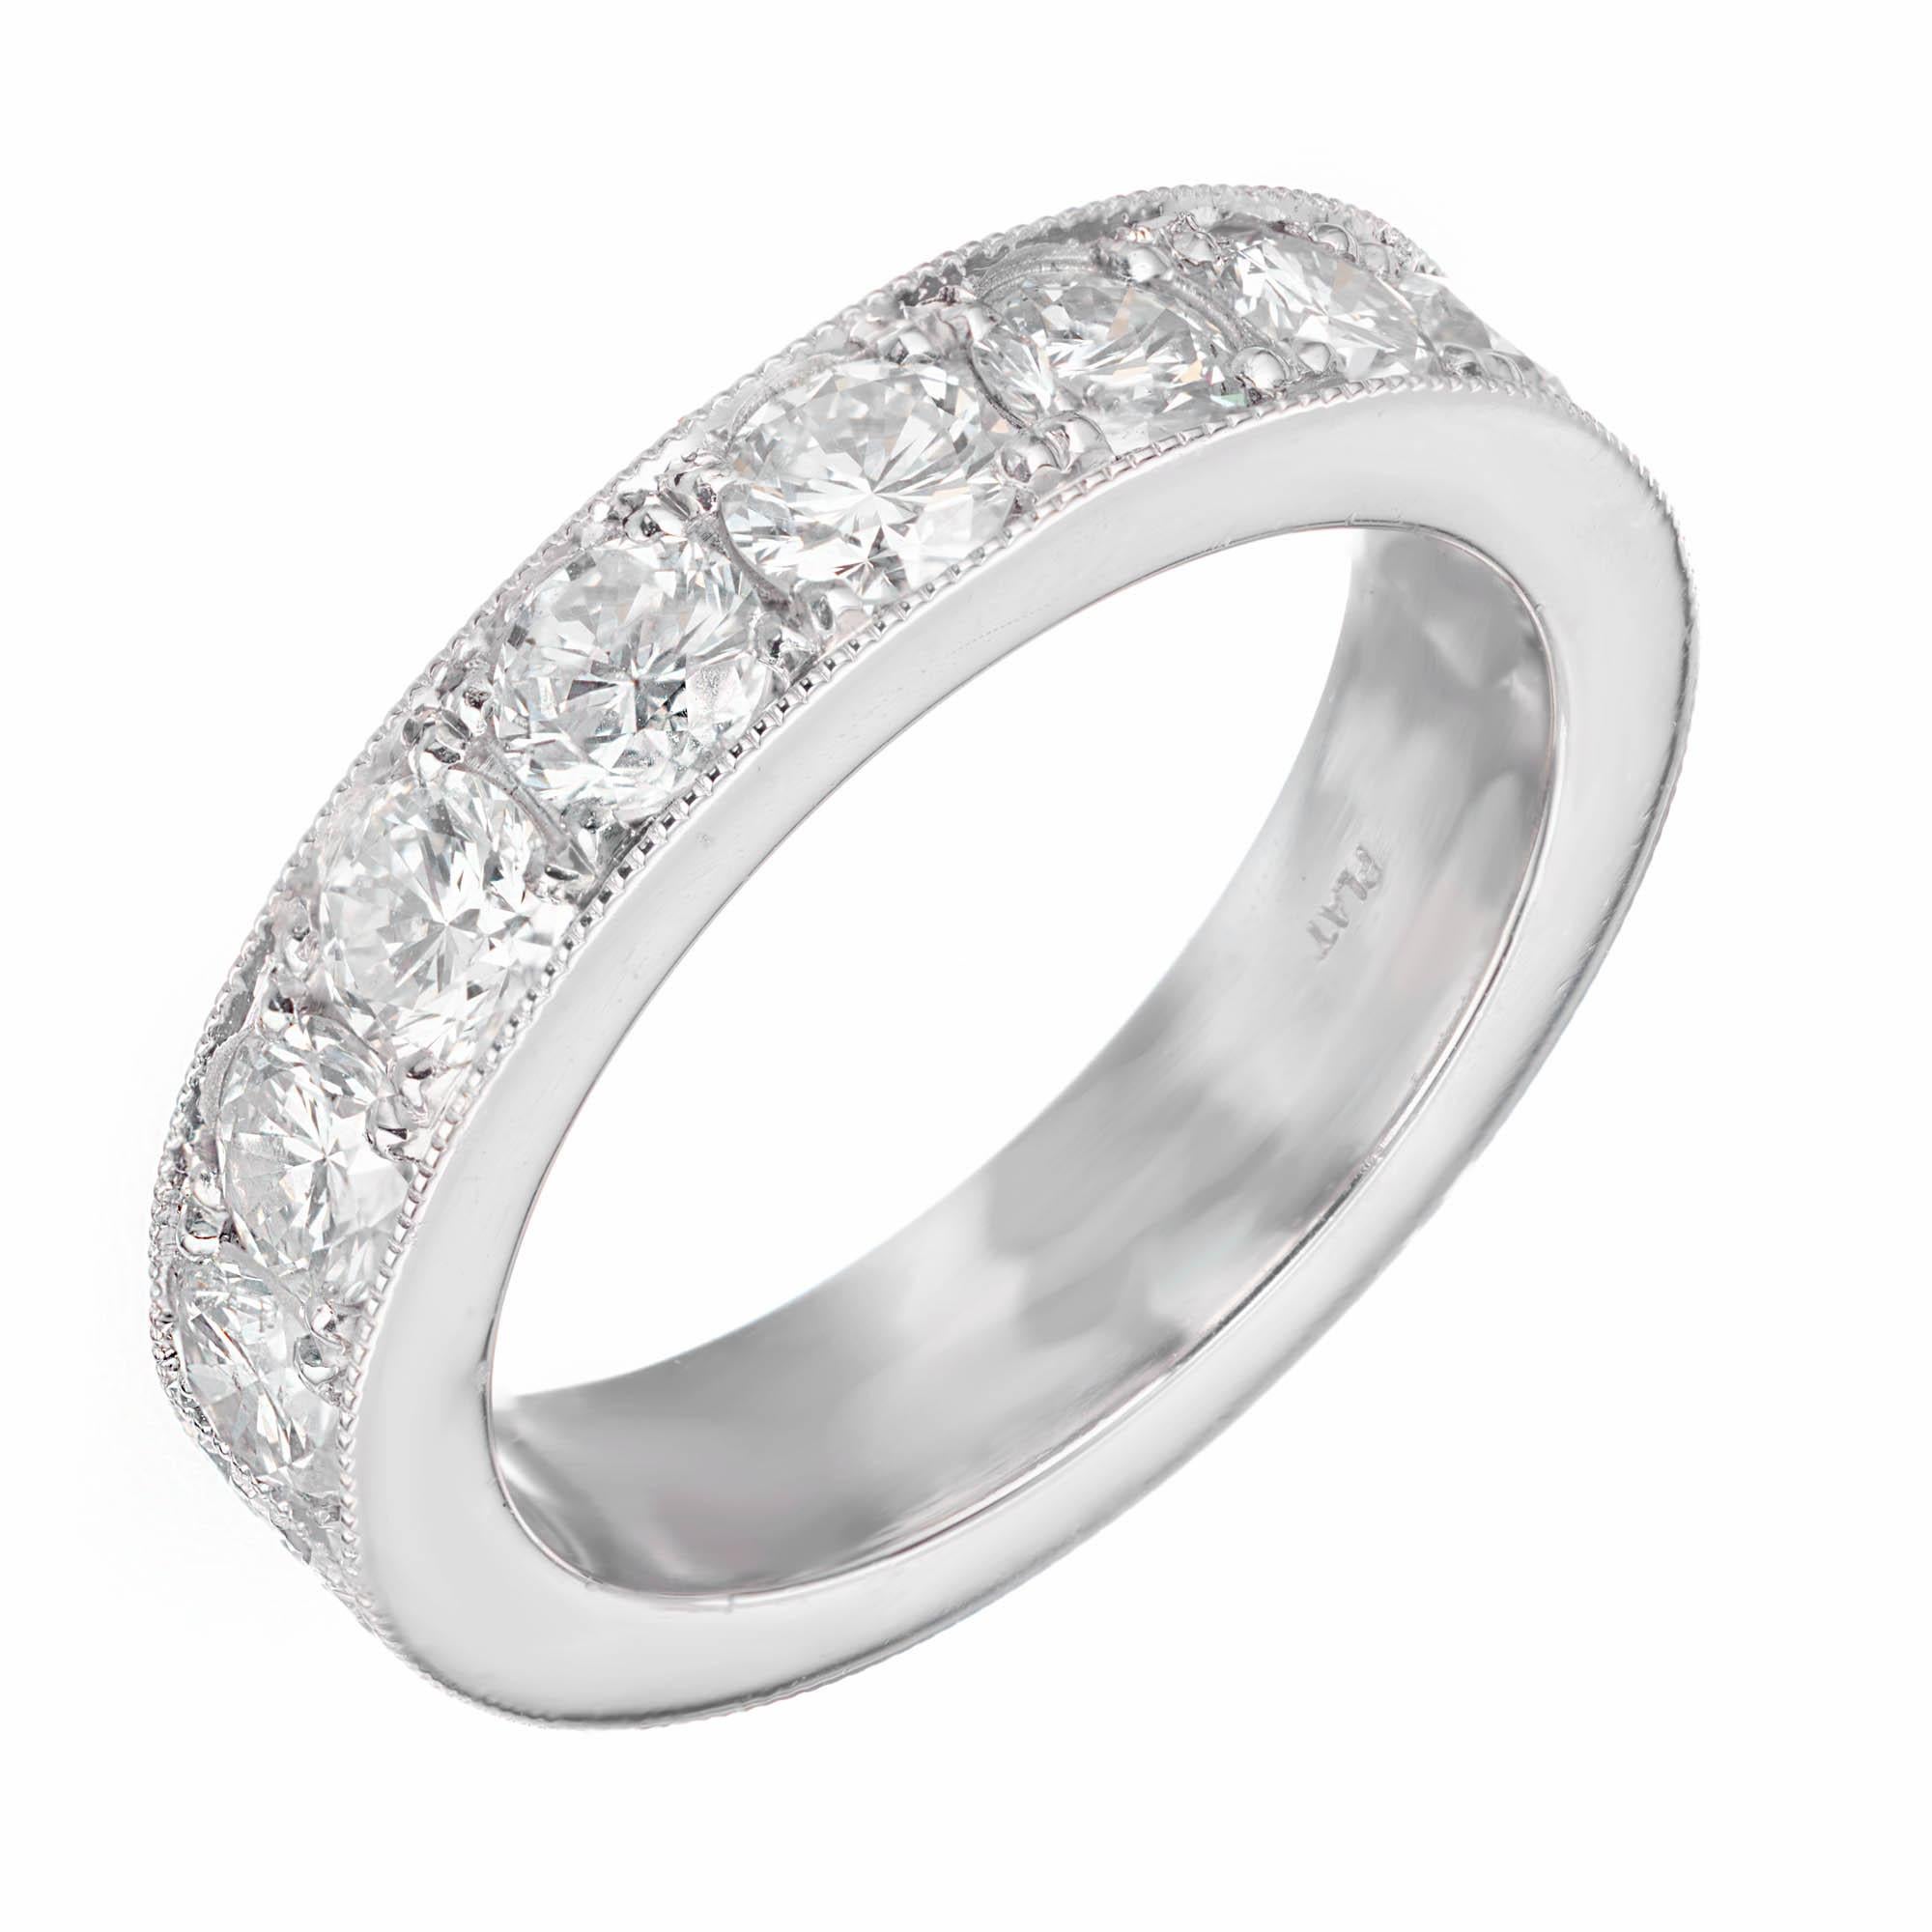 Peter Suchy 2.20 Carat Platinum Wedding Band Ring For Sale